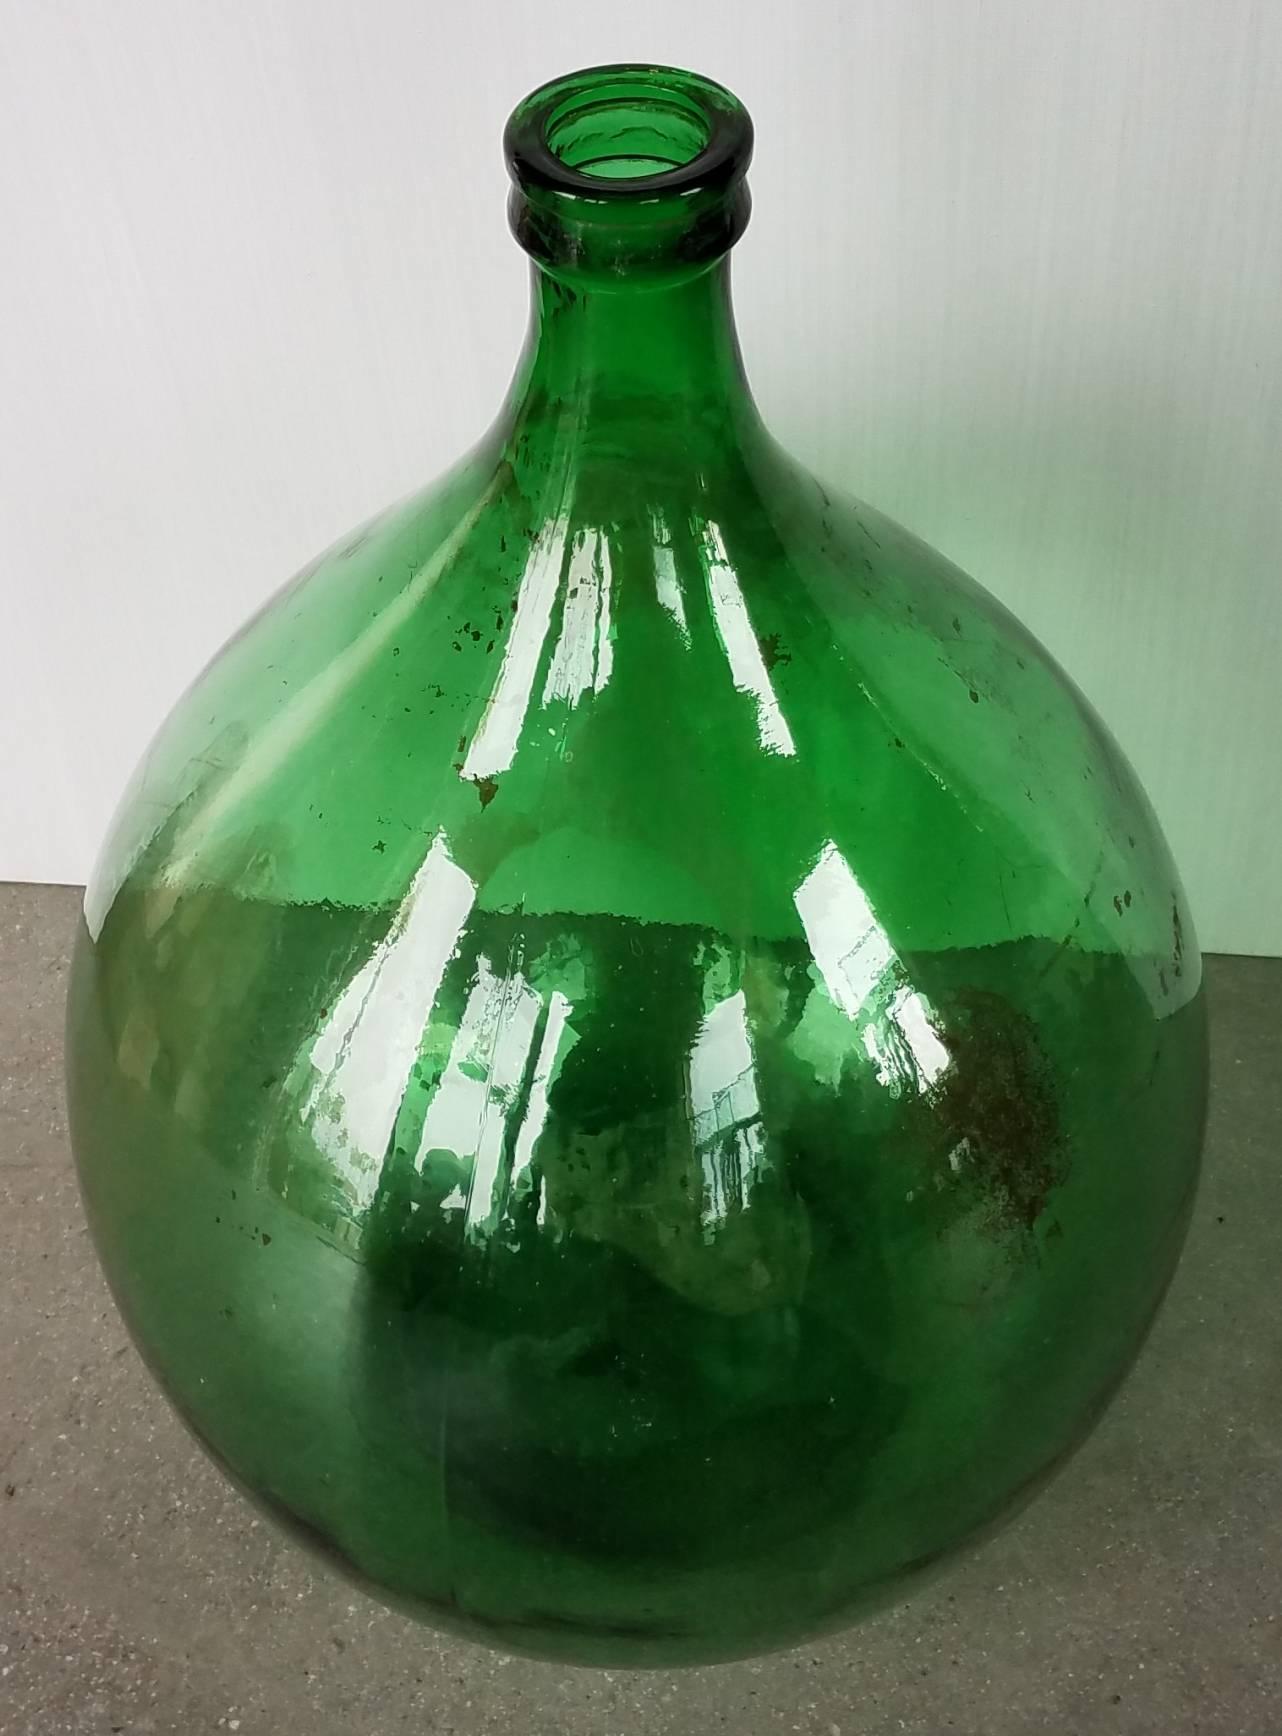 This antique Demijohn has beautiful green tone and has no chips or damage.  It has some residual wine left along the inside but what culd be cleaned easily removed.  A statement addition to a vignette,